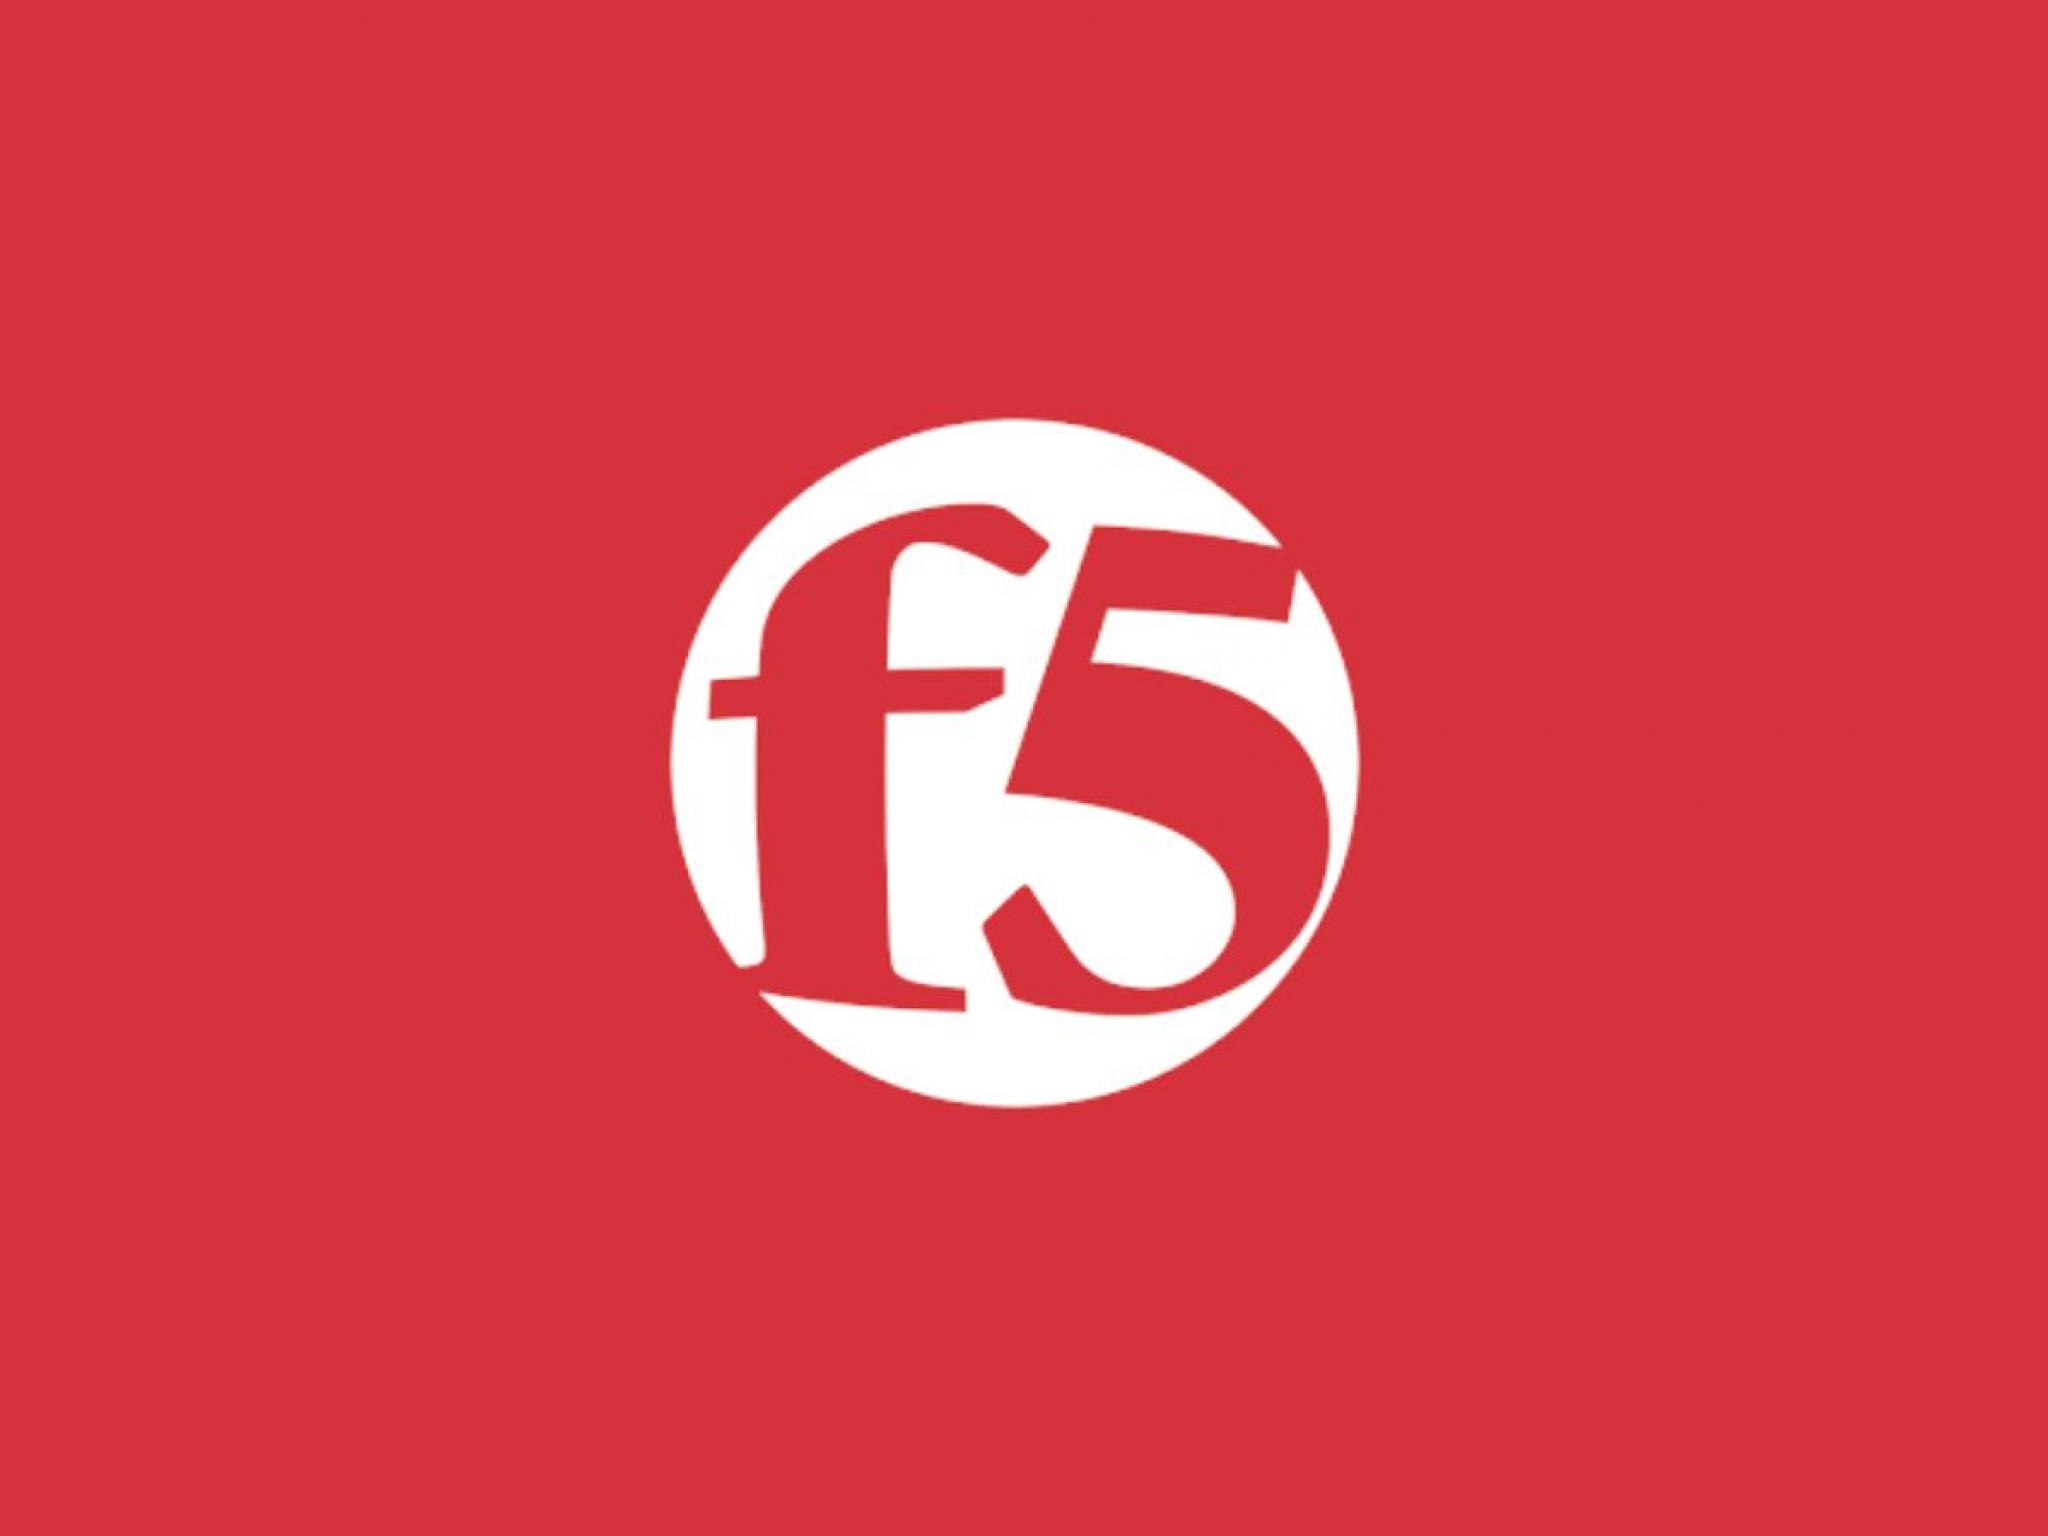  f5-analysts-boost-their-forecasts-after-better-than-expected-q1-results 